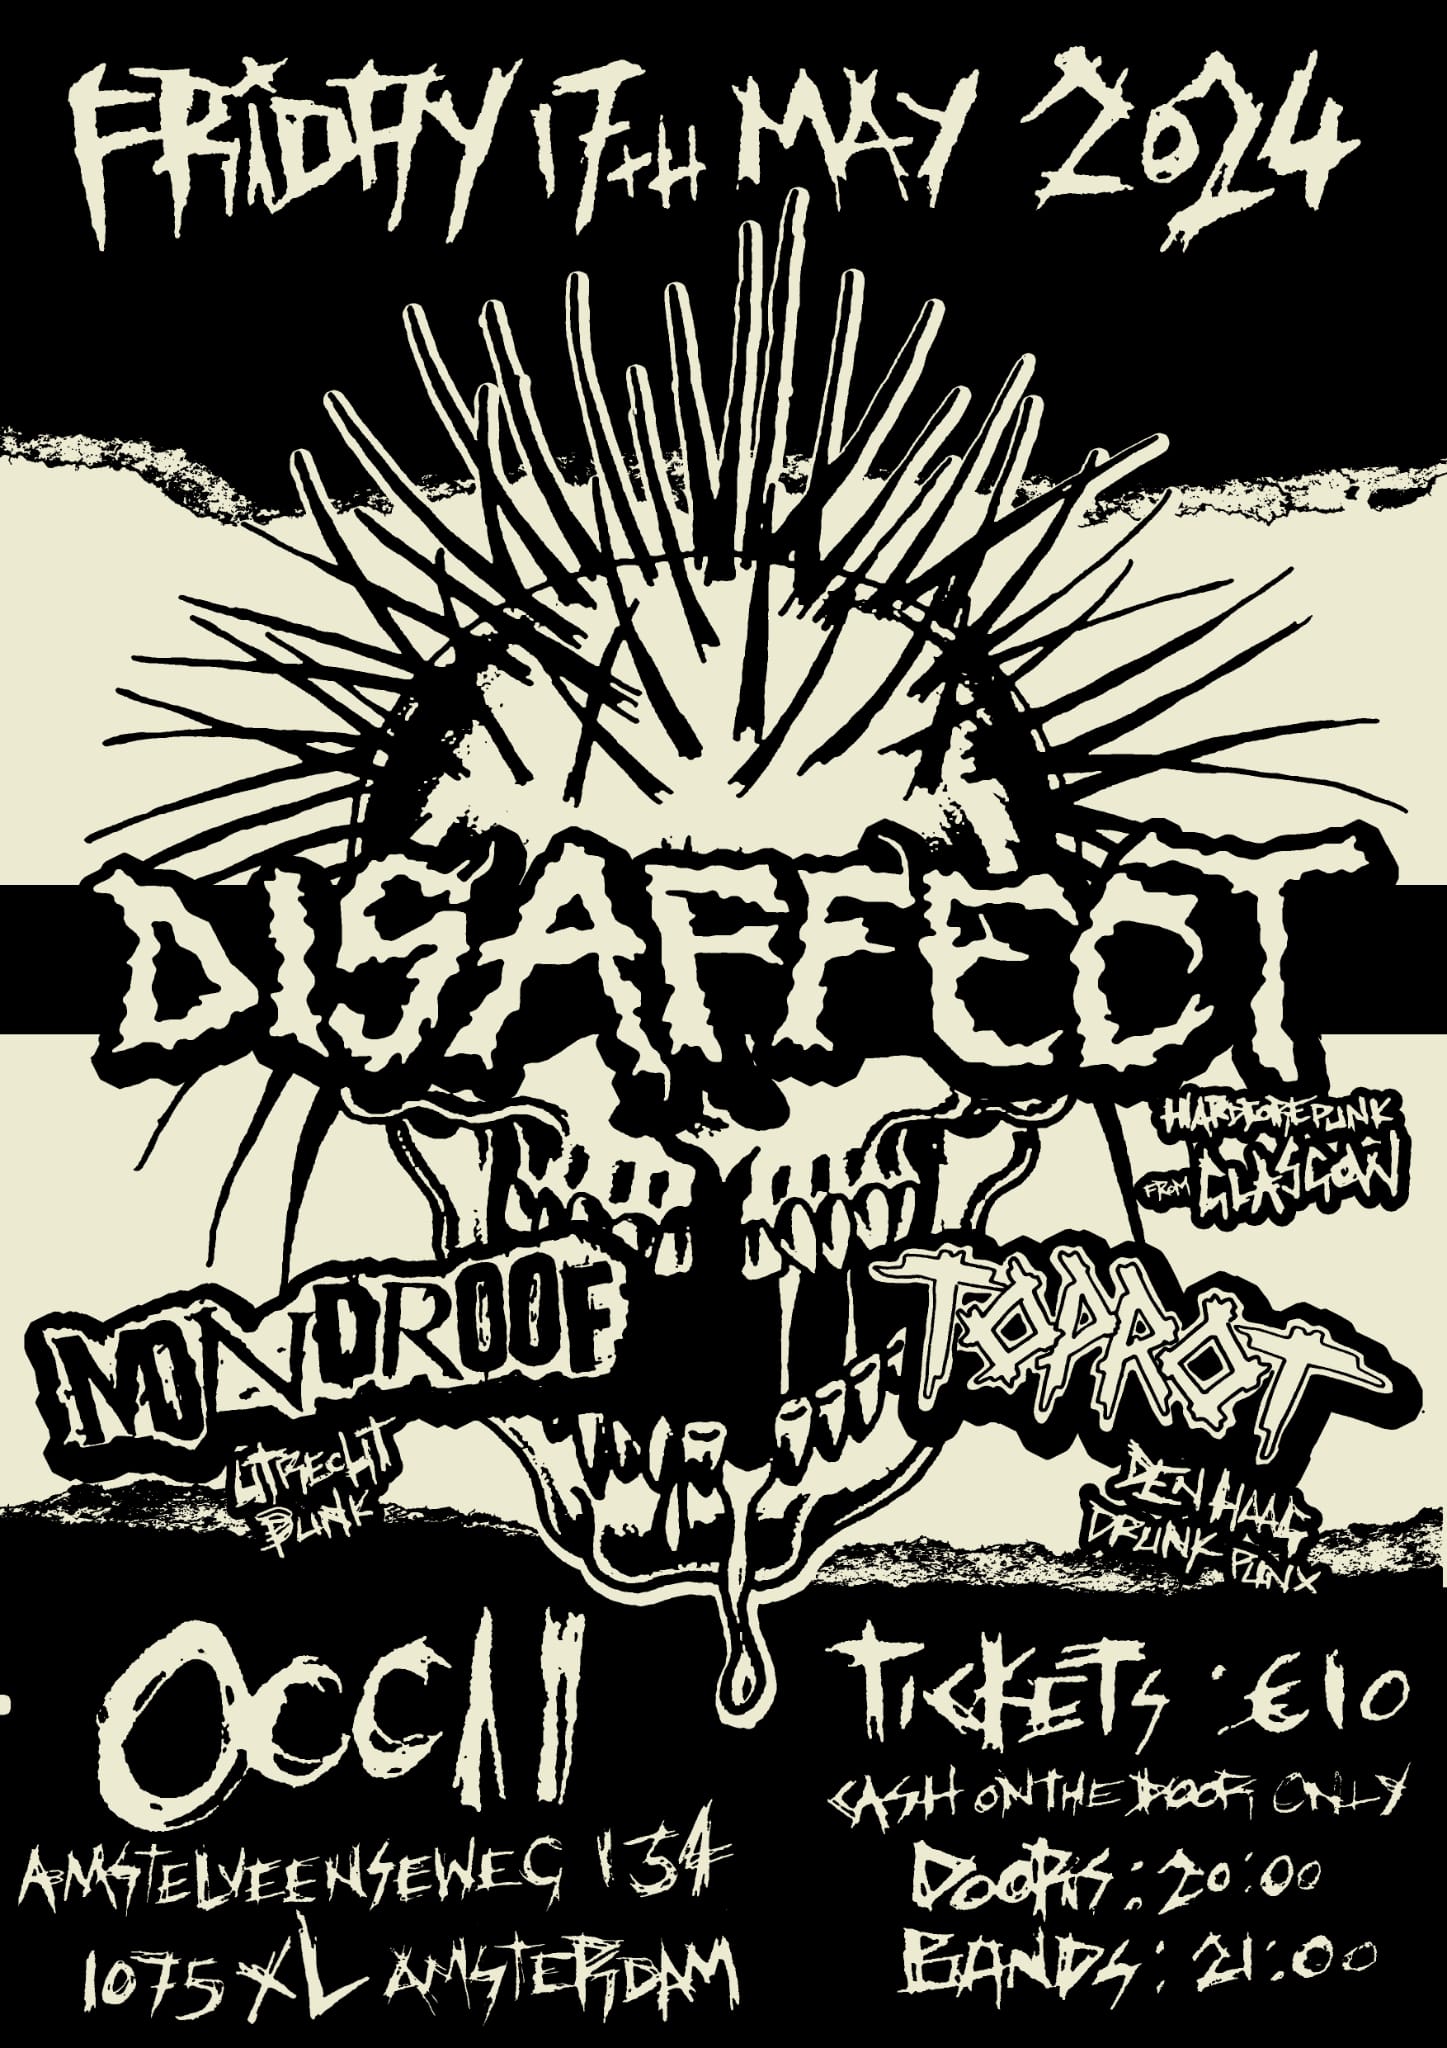 [CANCELLED!] DISAFFECT (SC) + MONDROOF + TOPROT